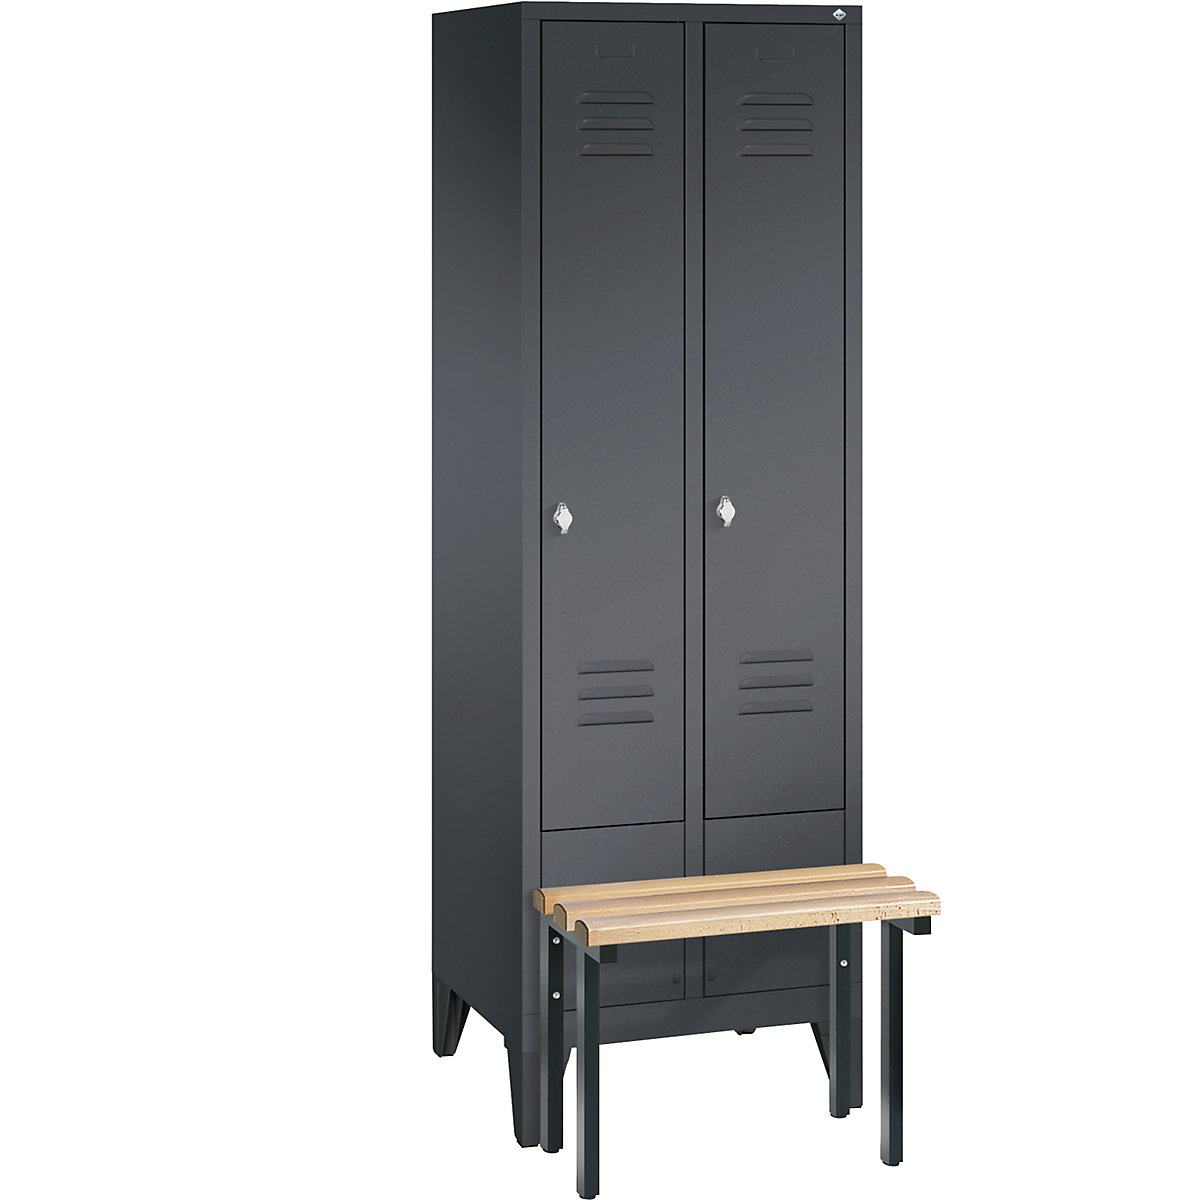 CLASSIC cloakroom locker with bench mounted in front – C+P, 2 compartments, compartment width 300 mm, black grey-3